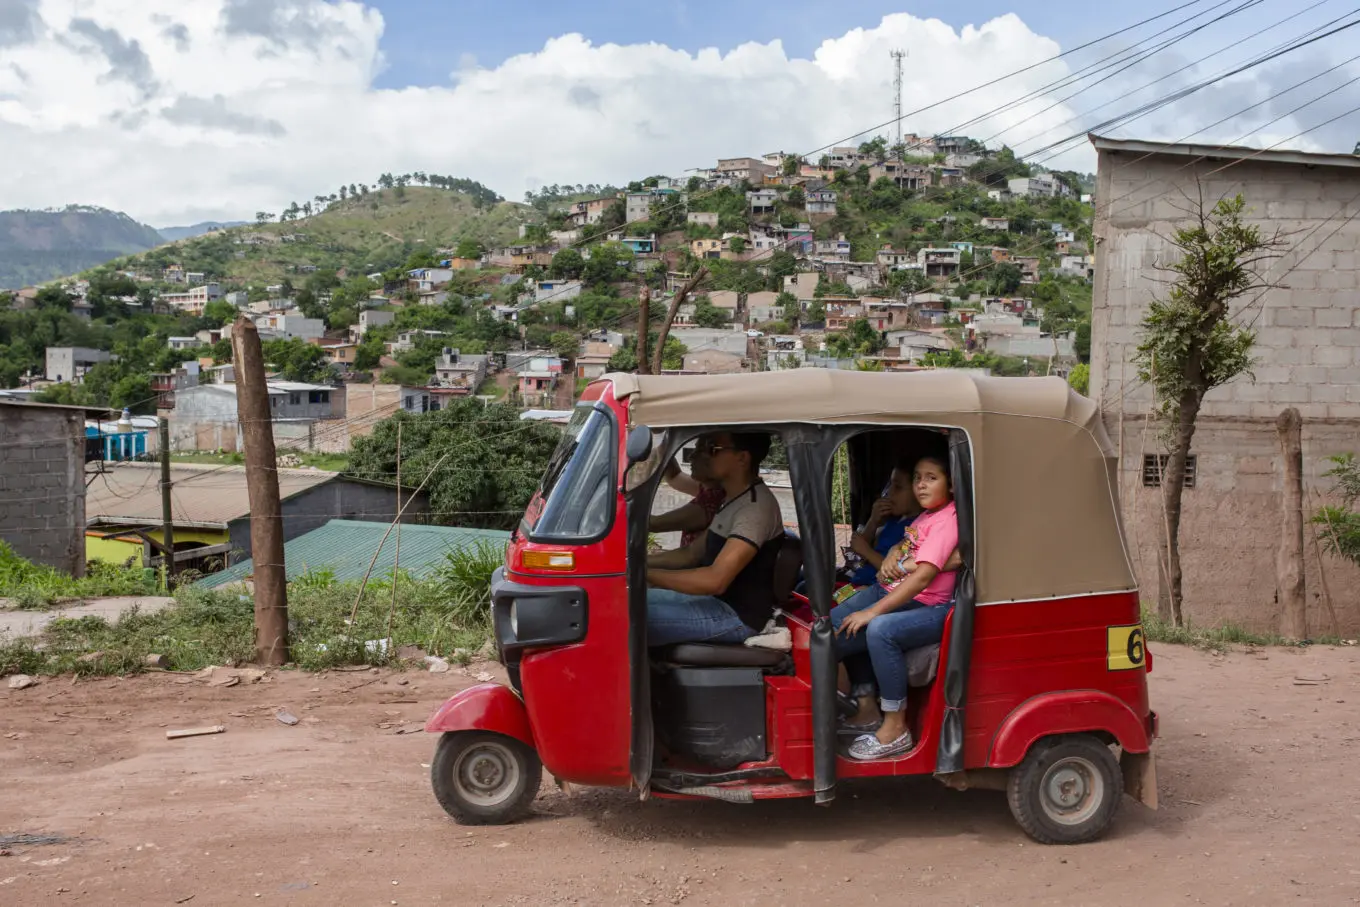 Locals sit in a rickshaw in the La Era neighbourhood of the Honduran capital Tegucigalpa. ; An estimated 174,000 Hondurans have been displaced by territorial violence from gangs, known as “maras”, in the decade between 2005 and 2015, according to a report from the Honduran government. The country had the highest homicide rate in the world in 2014 and families continue to abandon their homes in search of safer environments in the United States, Mexico and neighbouring Central American countries like Belize. In communities in cities like San Pedro Sula in the north, residents tell stories of relatives whose houses have been burned down, young boys being recruited into gangs and young girls too afraid to attend school because of the unwanted attentions of “mareros” (gang members). The UN Refugee Agency chief in Honduras, Andrés Celis, says mechanisms for people seeking protection from the government must be improved so that the state can respond more effectively to displaced people’s needs for shelter and relocation.